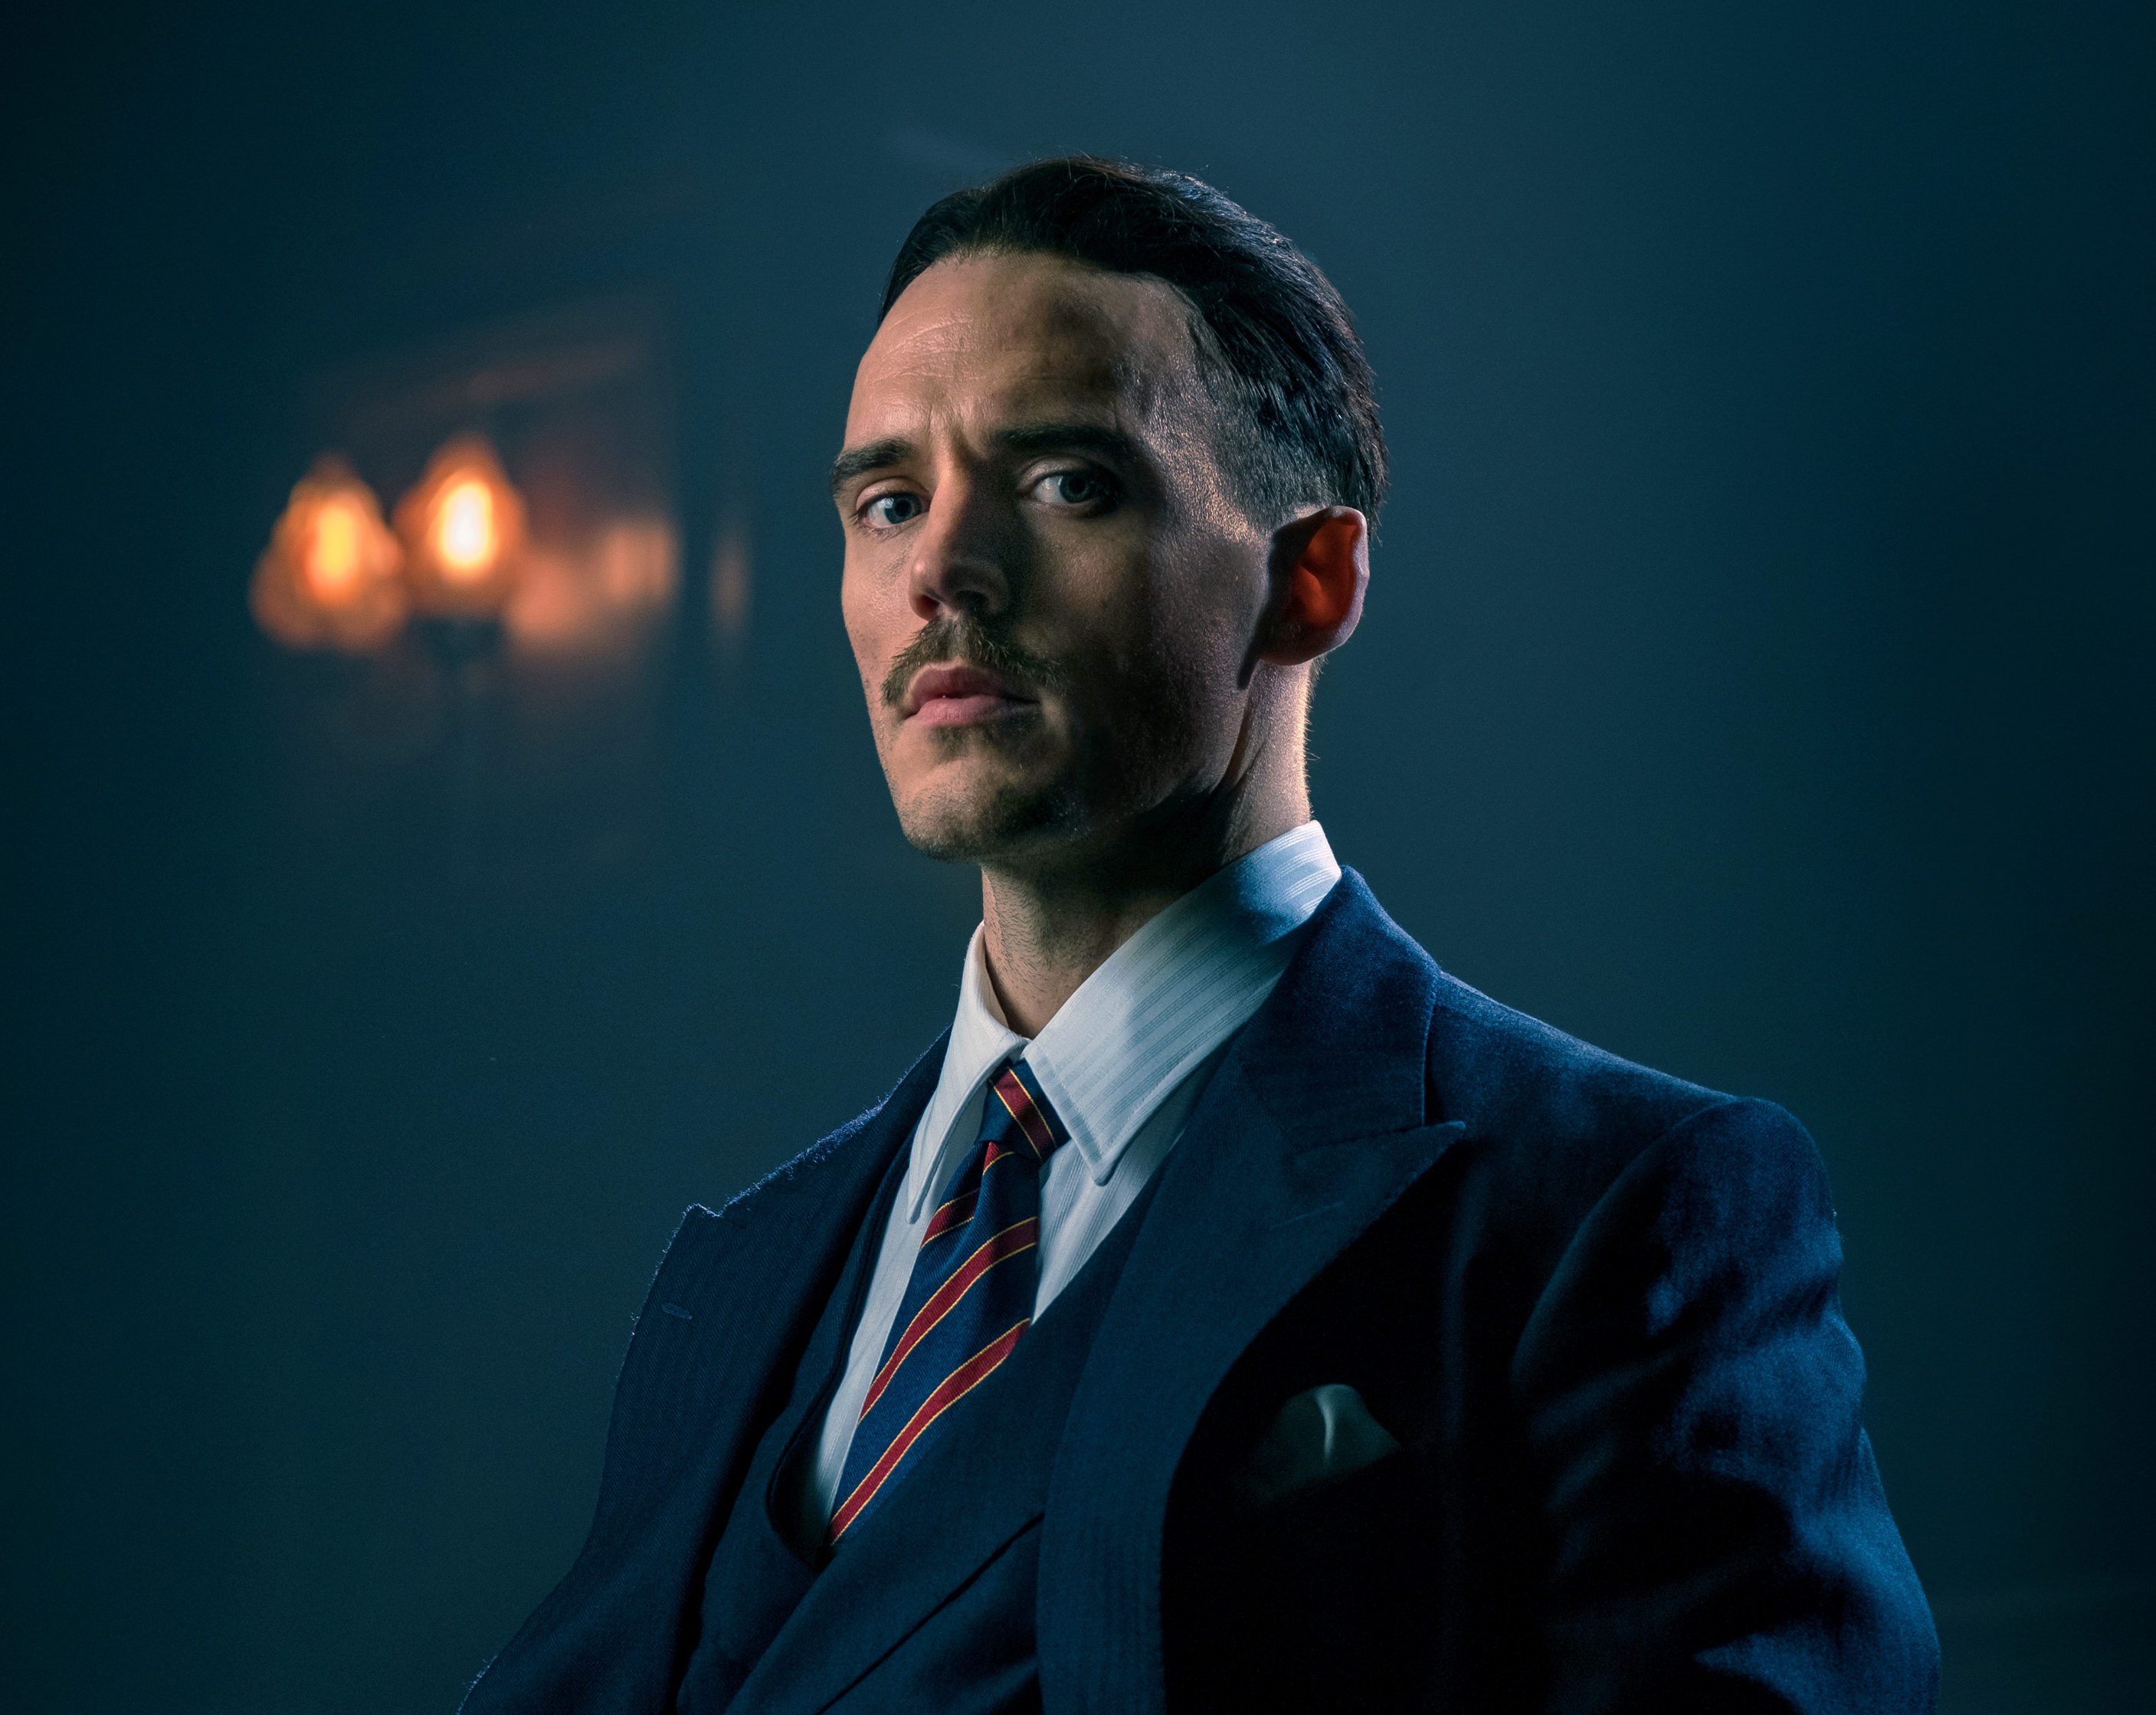 Oswald Mosley played by Sam Clafin in season five of Peaky Blinders.